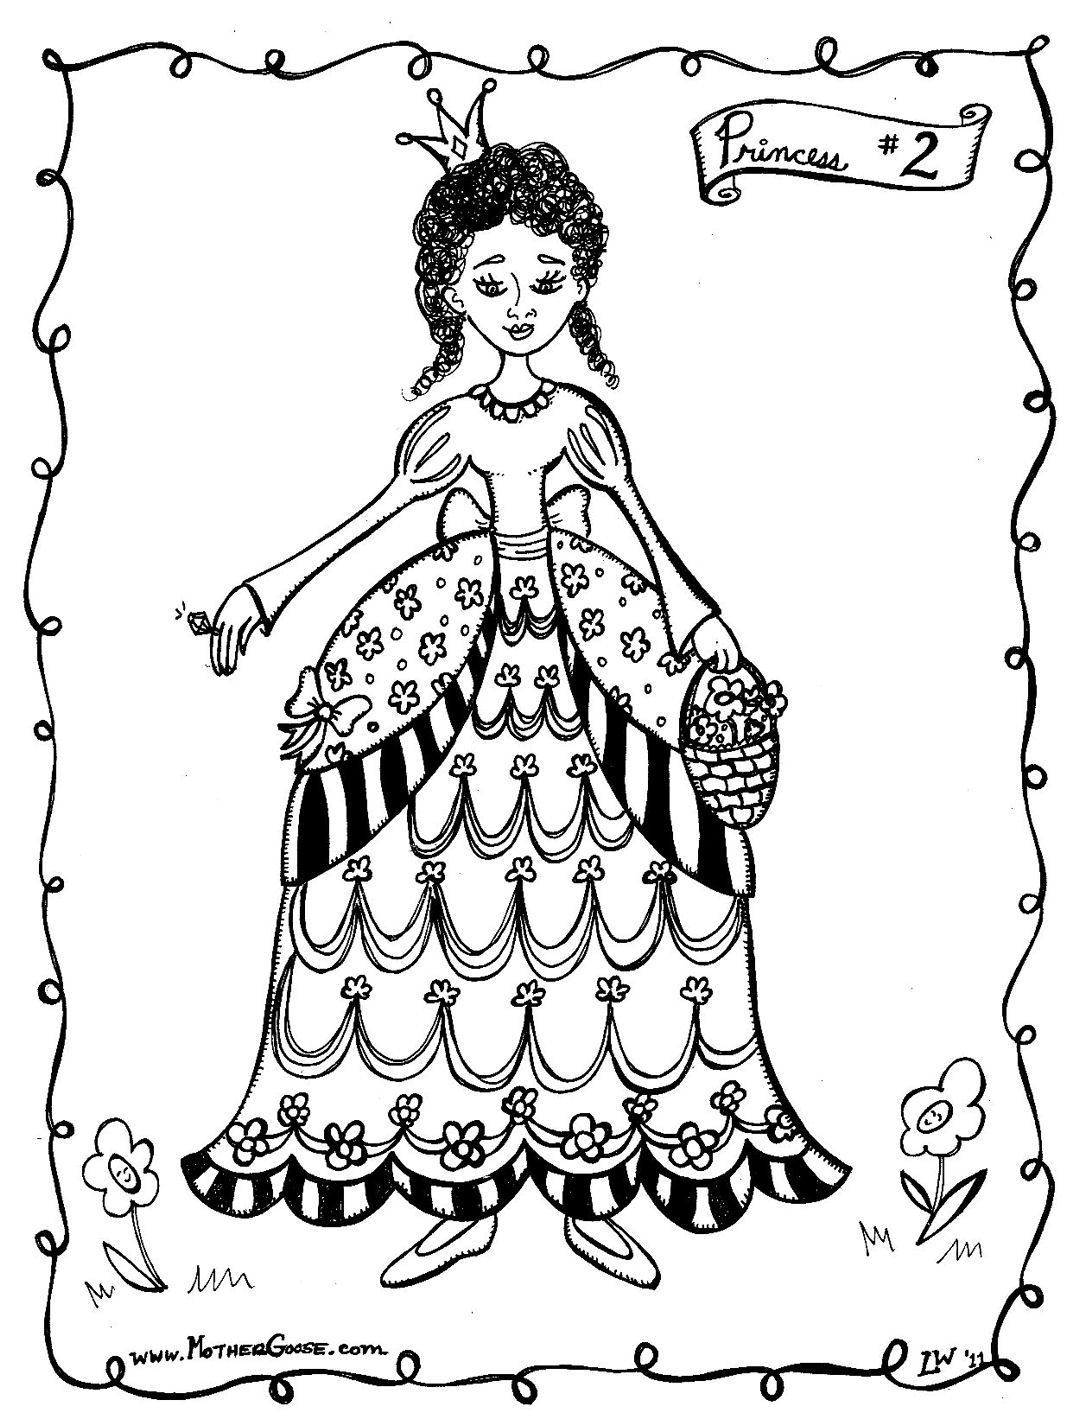 Flower Princess Coloring Pages - Coloring Home